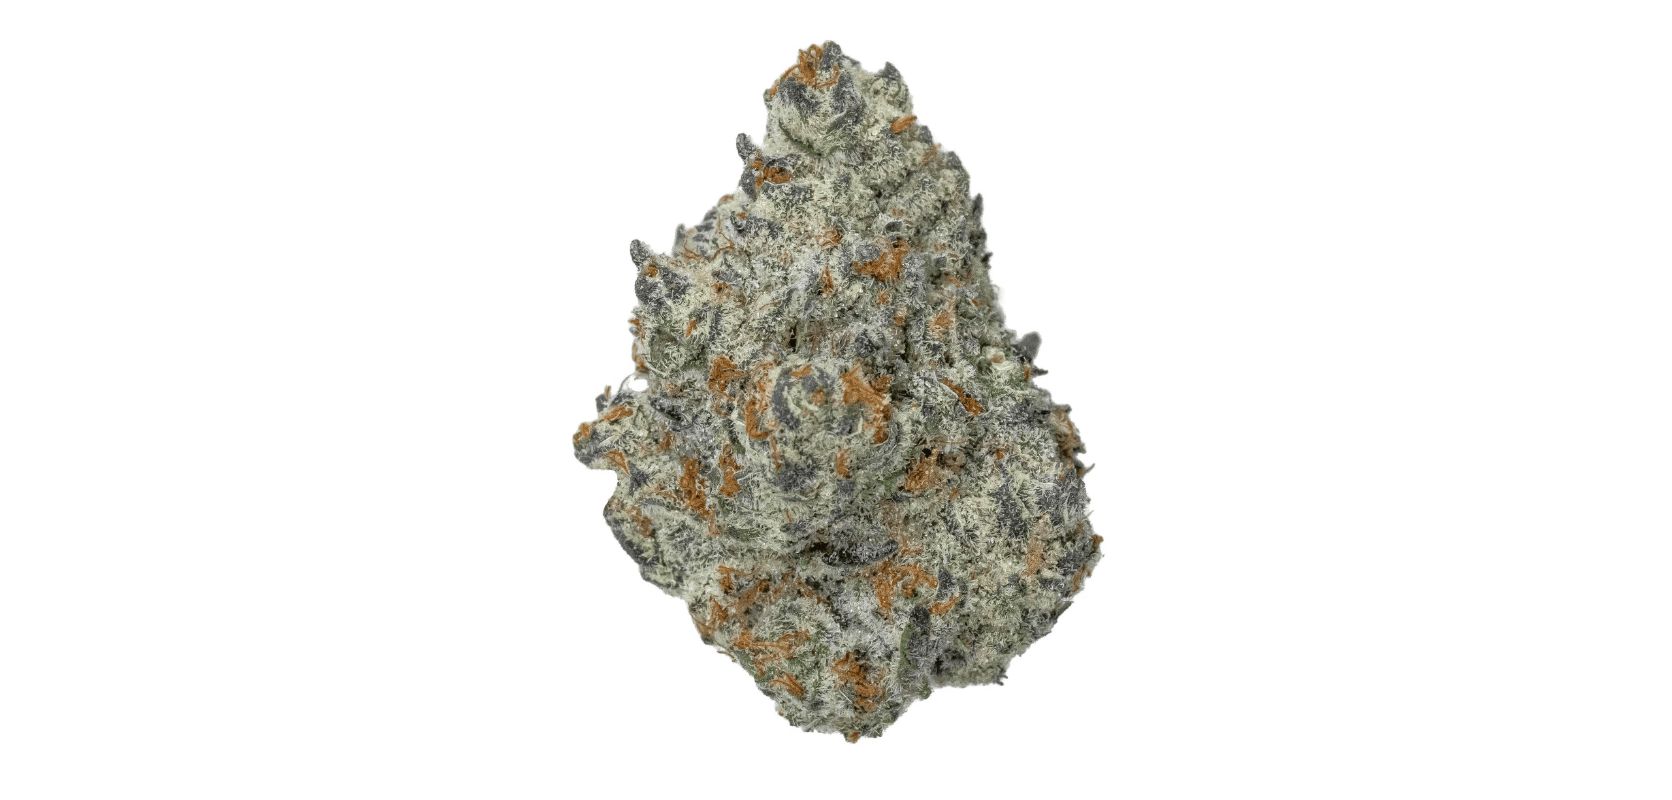 Ice Cream Cake strain is an indica-leaning hybrid loved for its potent and relaxing effects.